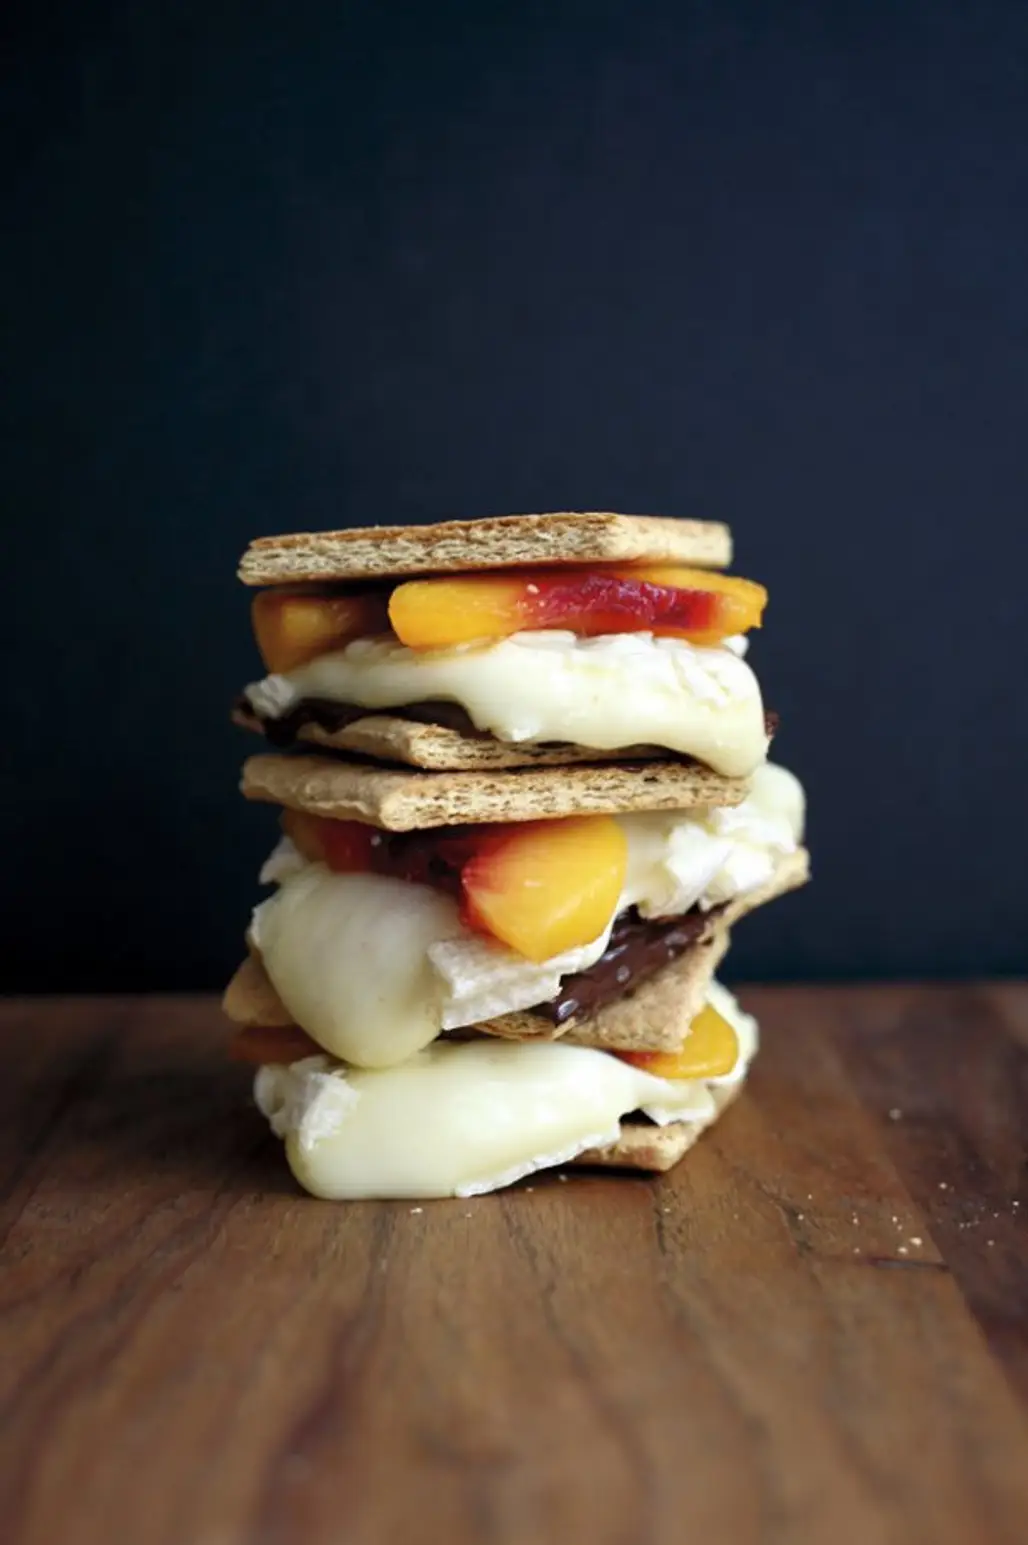 Make Peach, Brie, and Dark Chocolate S’mores